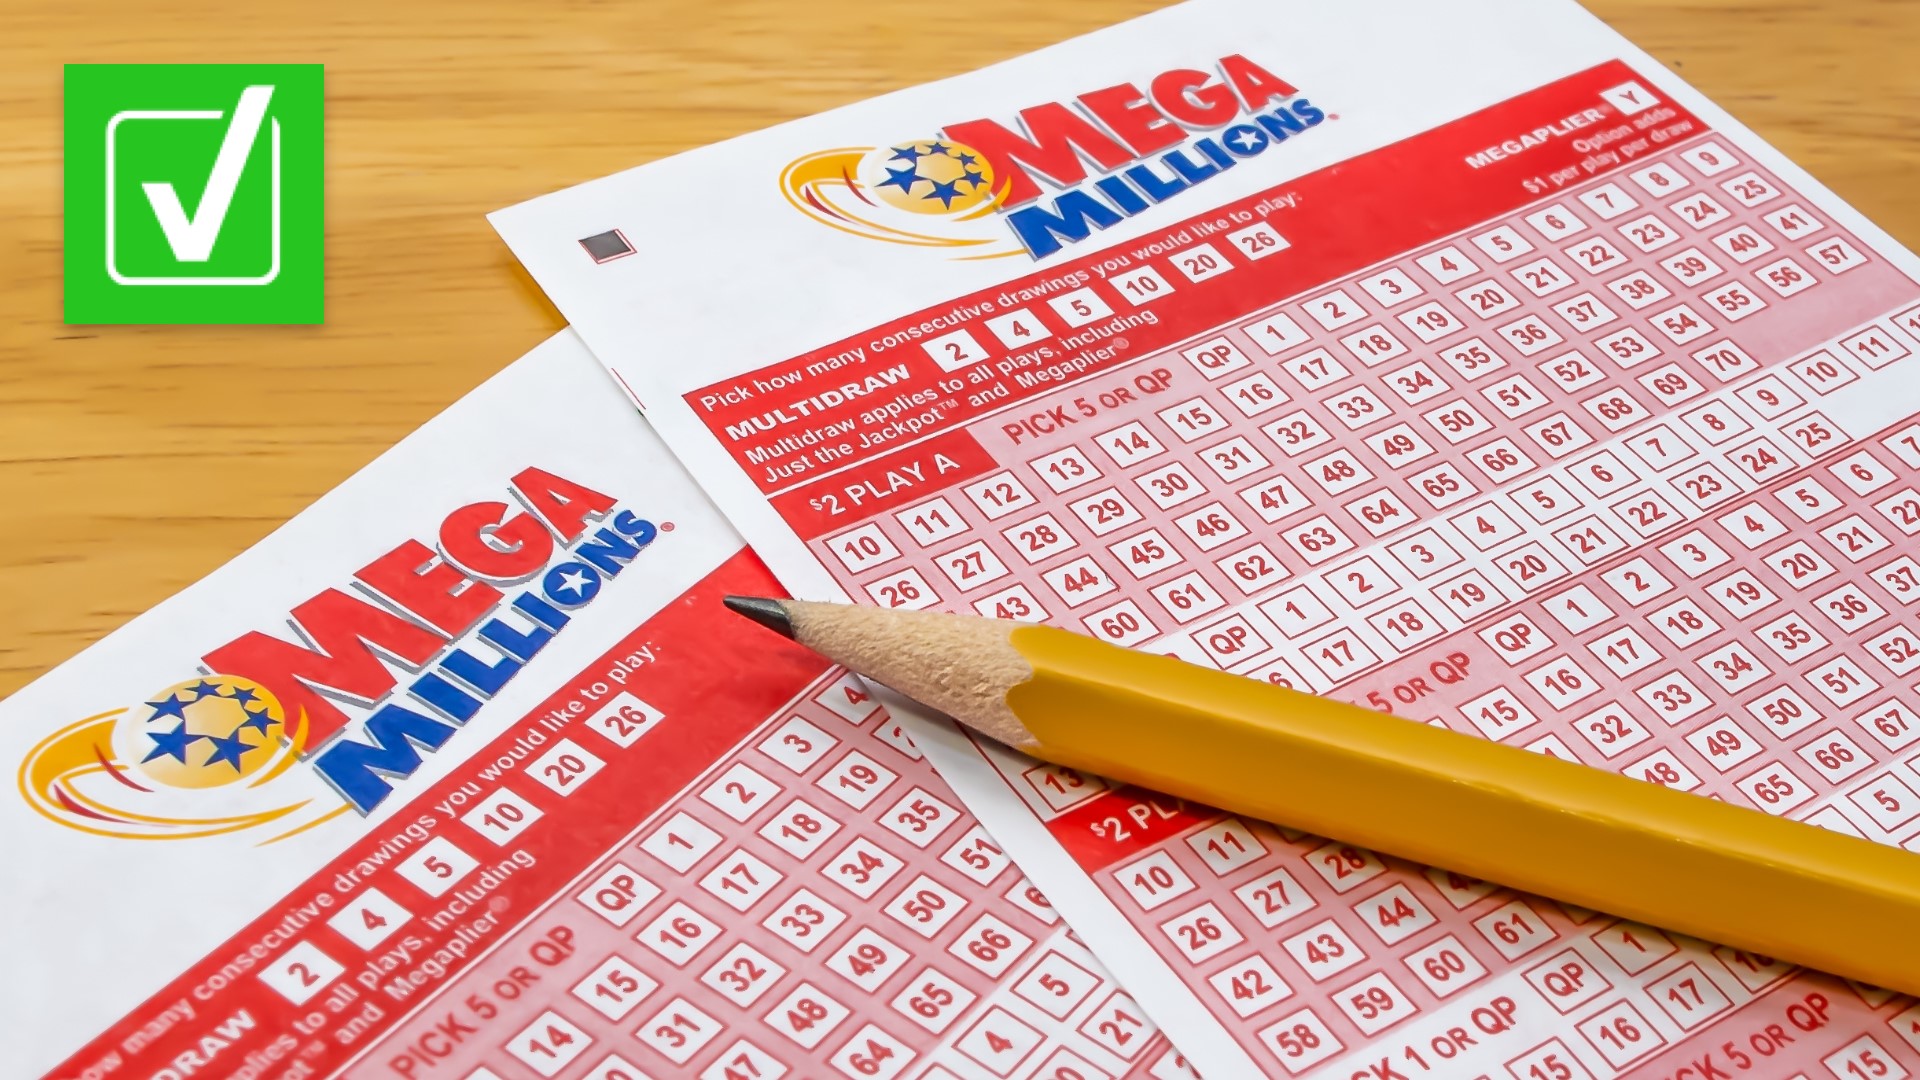 Do the odds of winning Mega Millions change based on how many tickets are sold or the size of the jackpot? Here's what we can Verify, plus how to improve your odds.